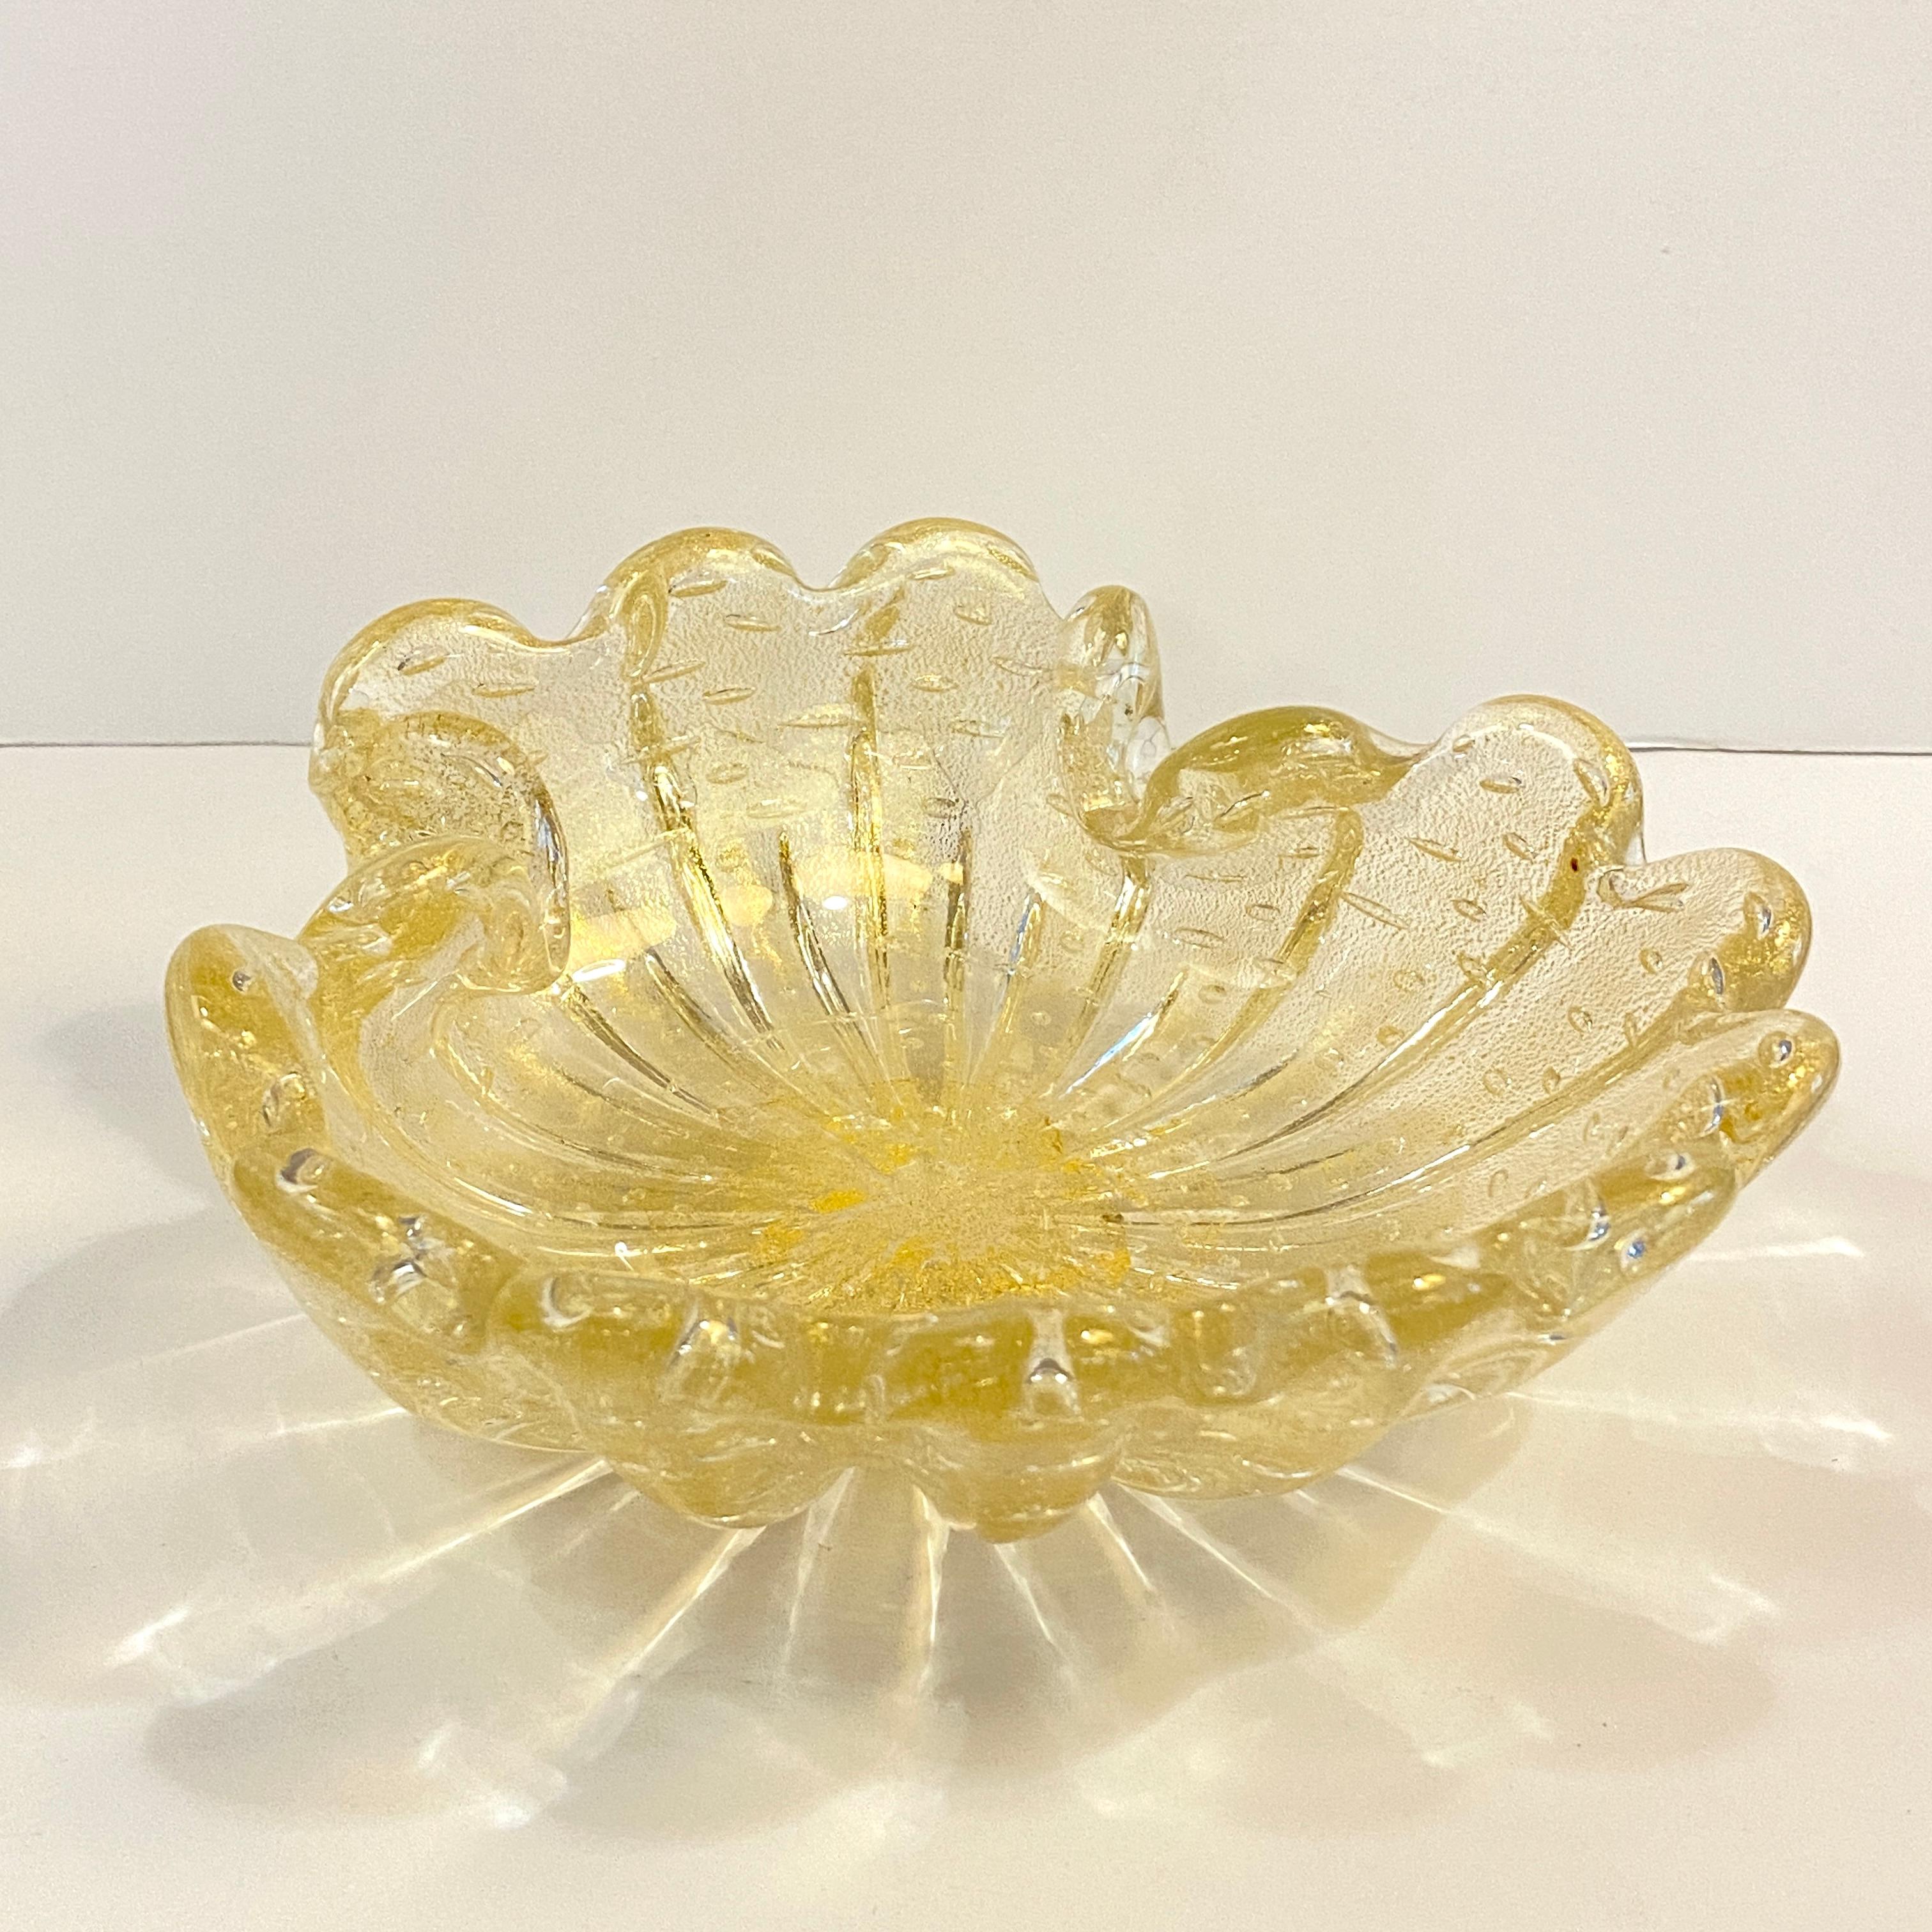 Midcentury, Murano, Italian, hand-blown, art glass clamshell dish or ashtray is embellished with gold flecks creating an overall light champagne tone that shimmers beautifully in the light. The dish also features the bullicante technique for a